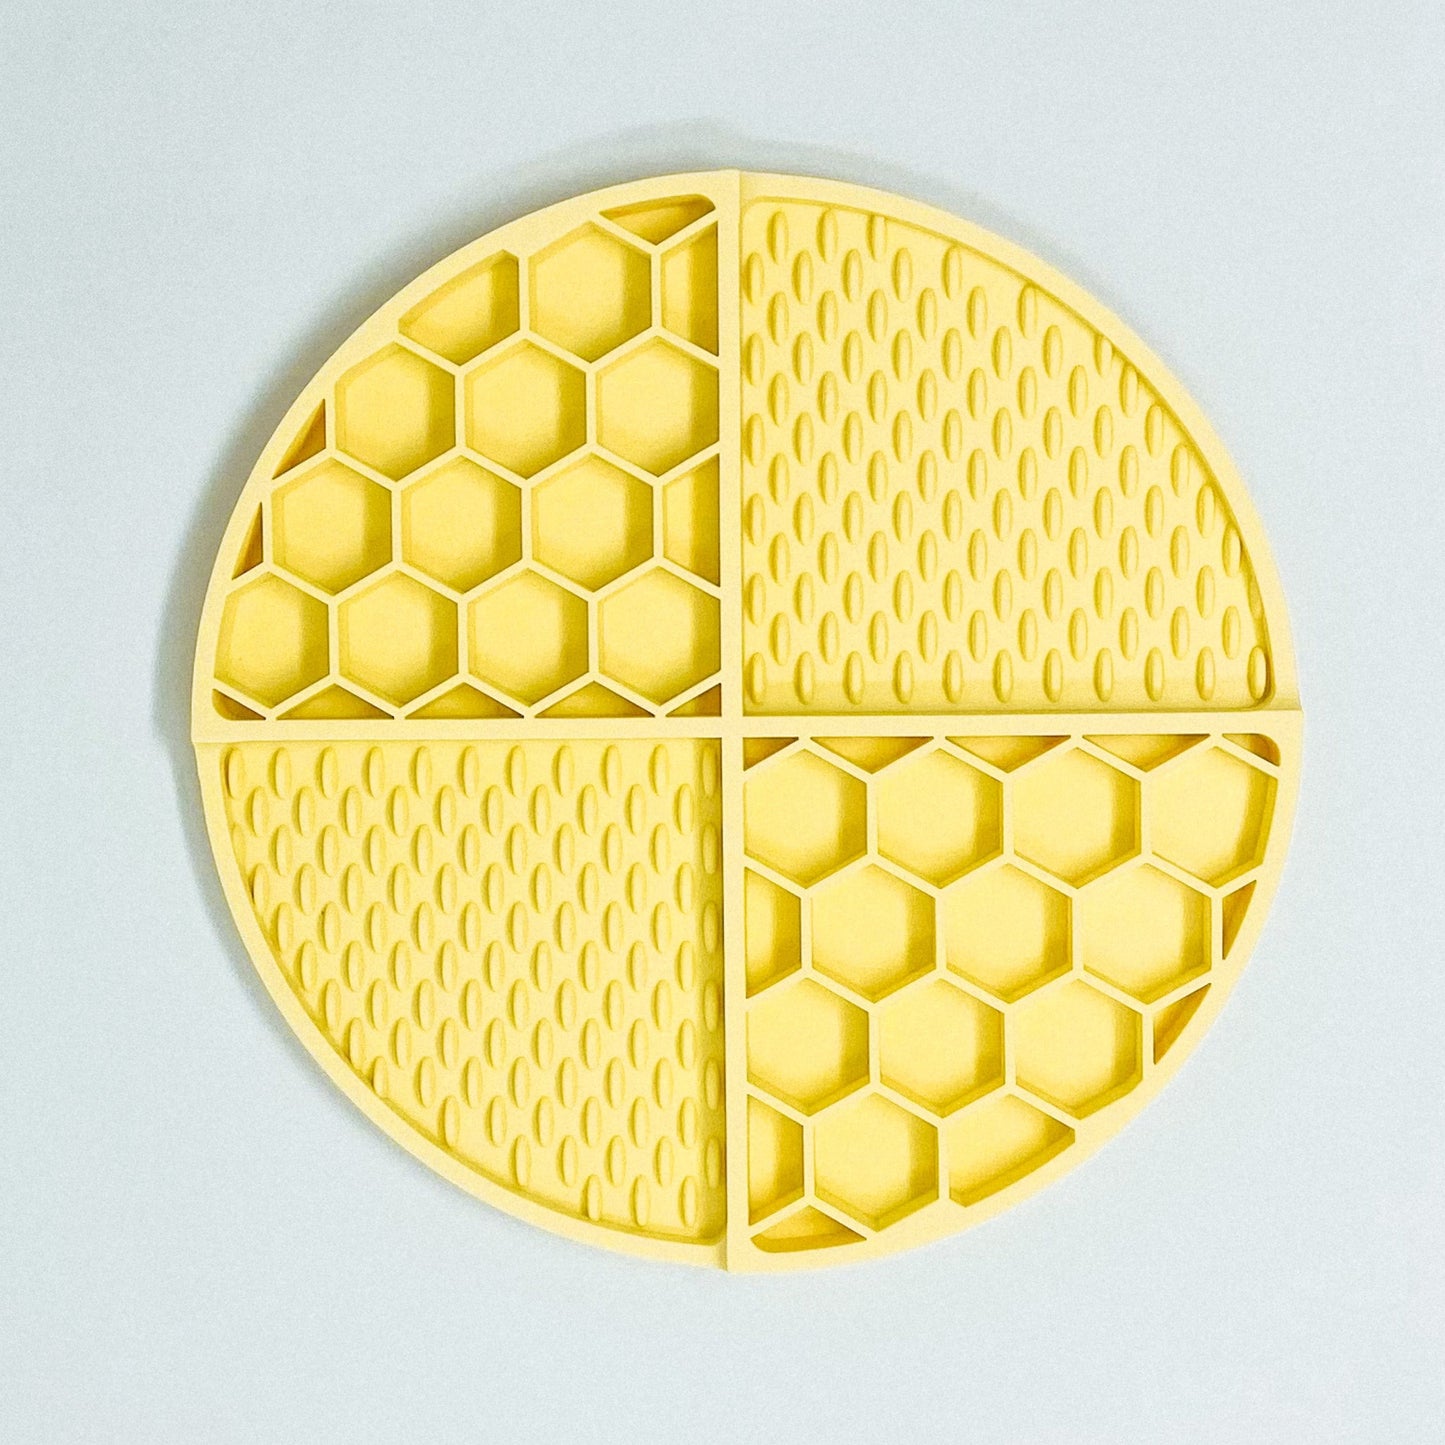 Light yellow silicone lick mat, separated into 4 sections. 2 sections are honeycomb shaped and 2 sections are licky texture.